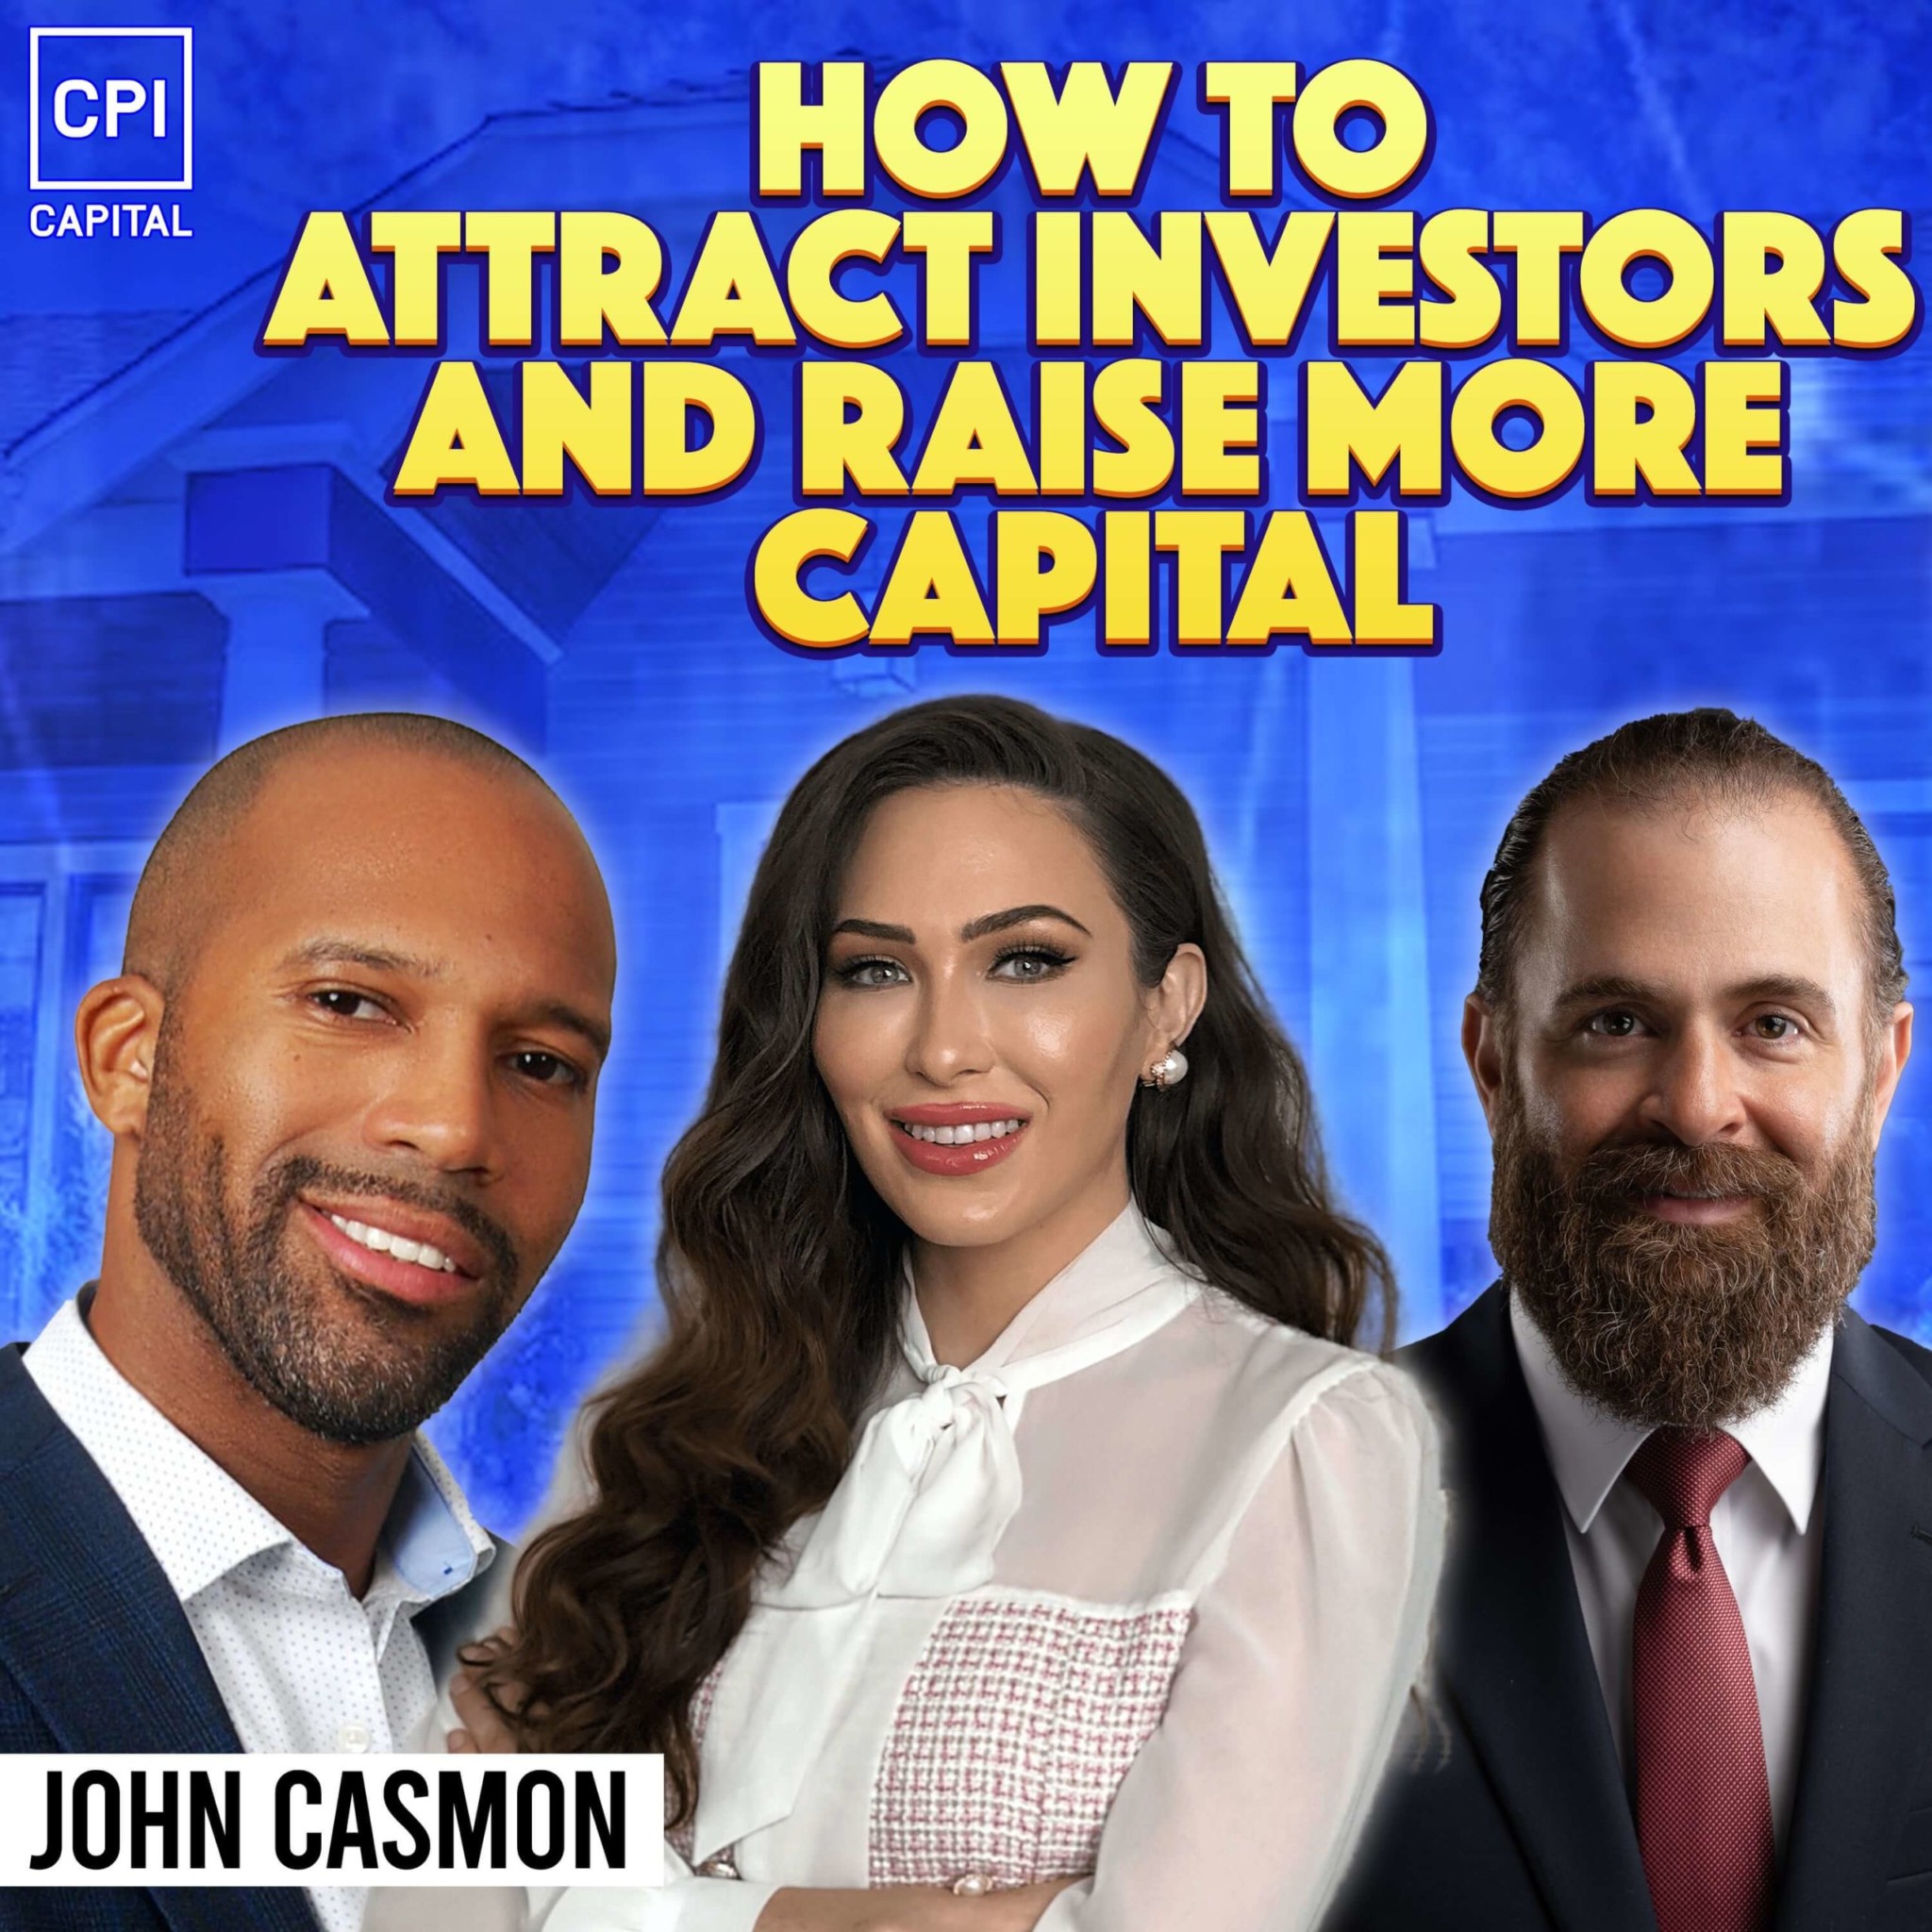 How To Attract Investors And Raise More Capital – John Casmon